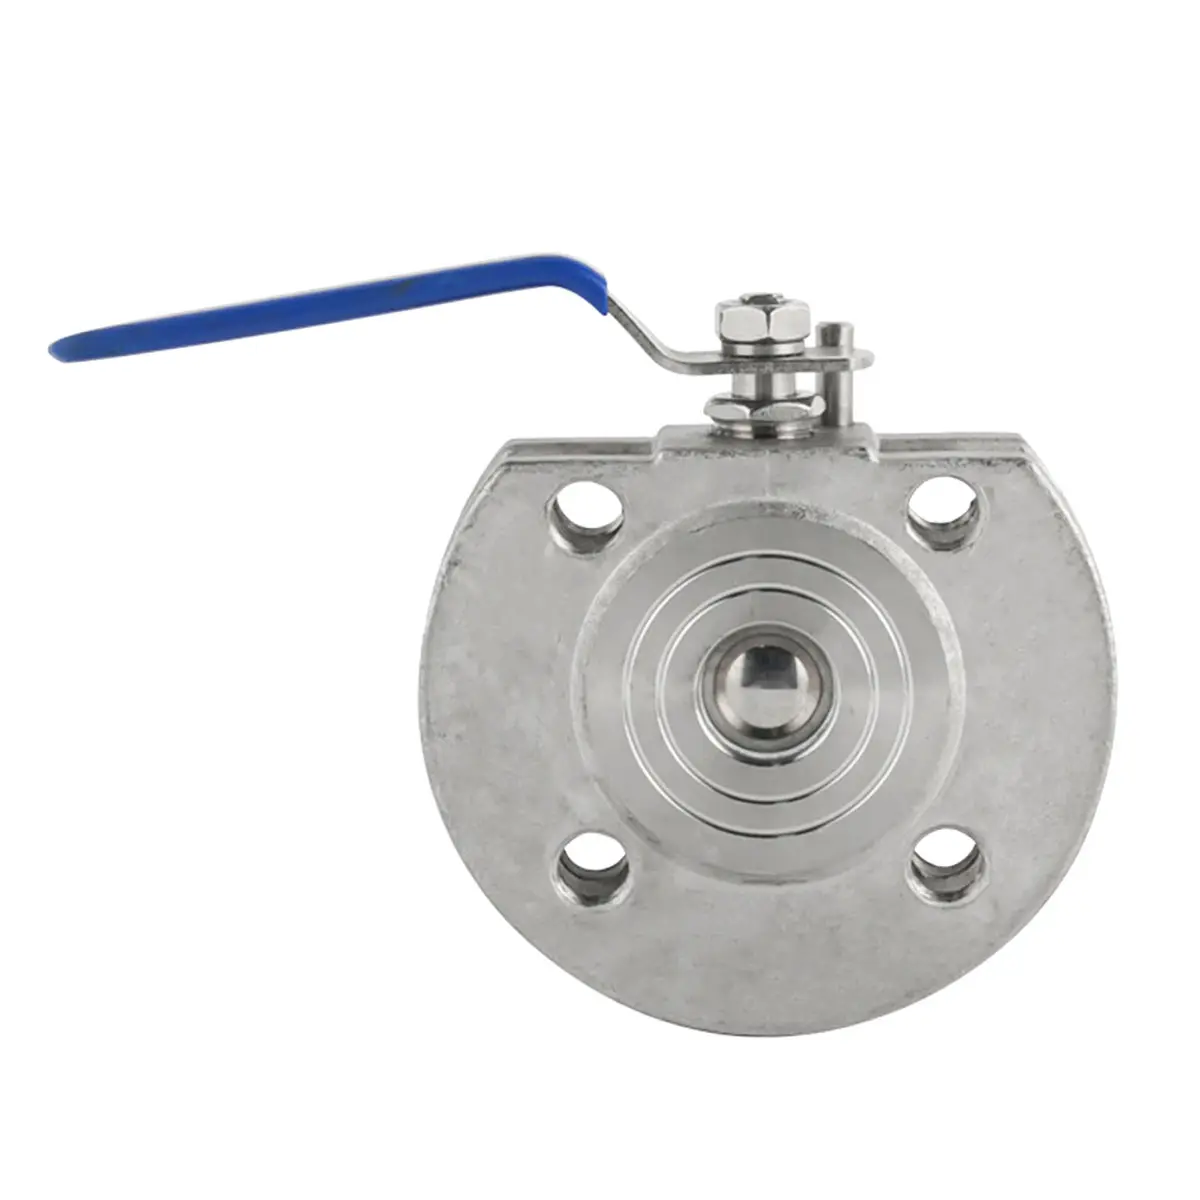 Hot selling Q71F-16P stainless steel wafer type flange ball valve  cast steel thin and ultra-thin manual ball valve